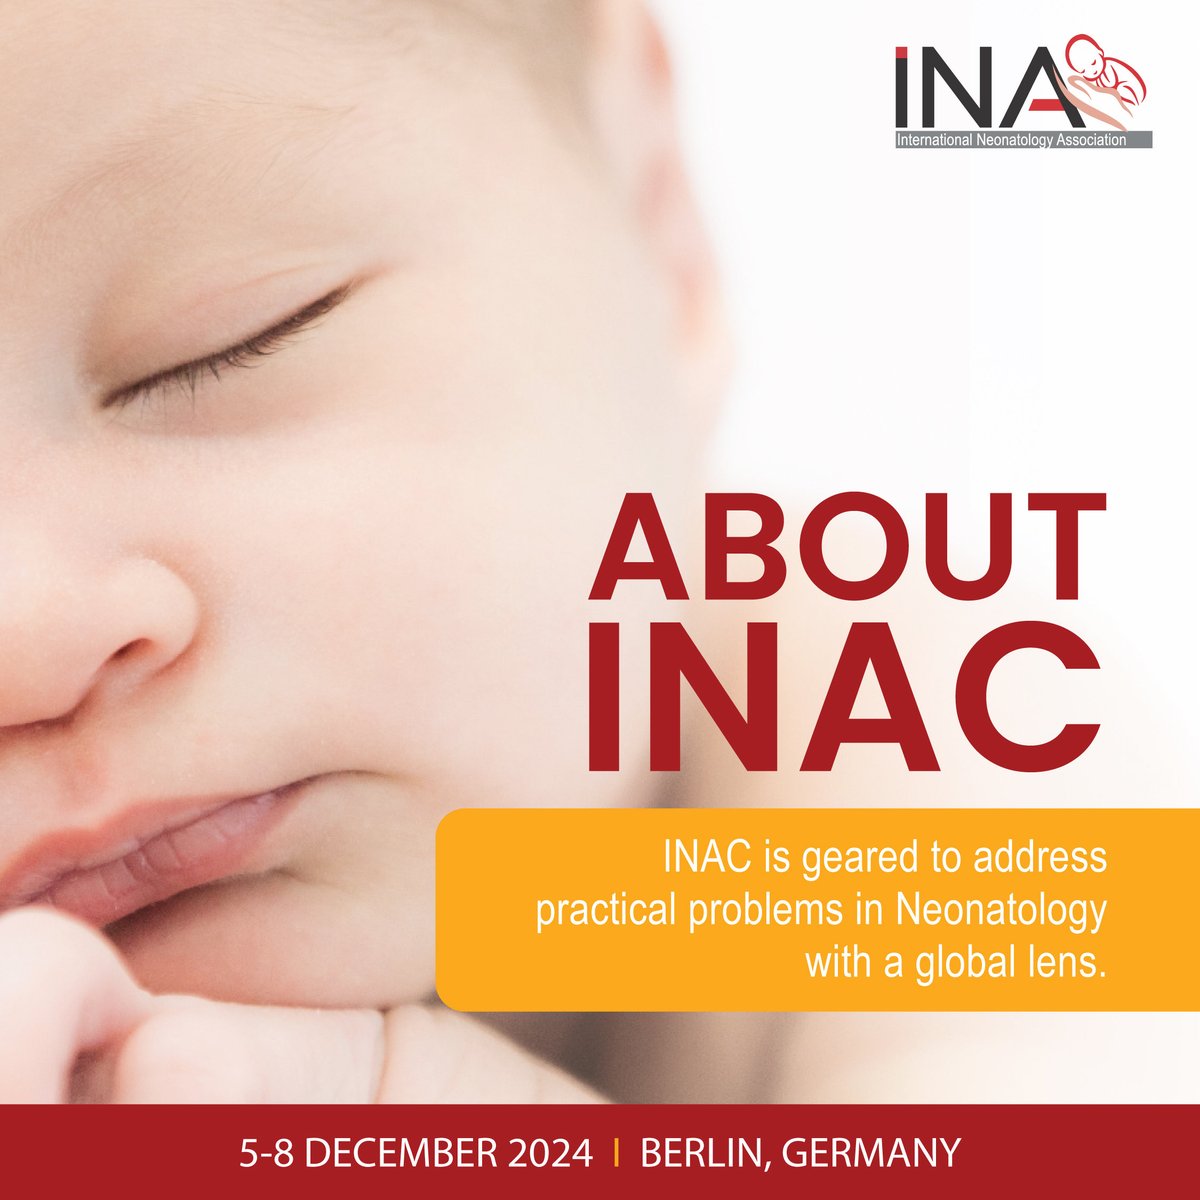 More about INAC: INAC is short for the International Neonatology Association Conference. INAC is geared to address practical problems in Neonatology with a global lens. Learn more on our website: worldneonatology.com/2024/about-gen…...